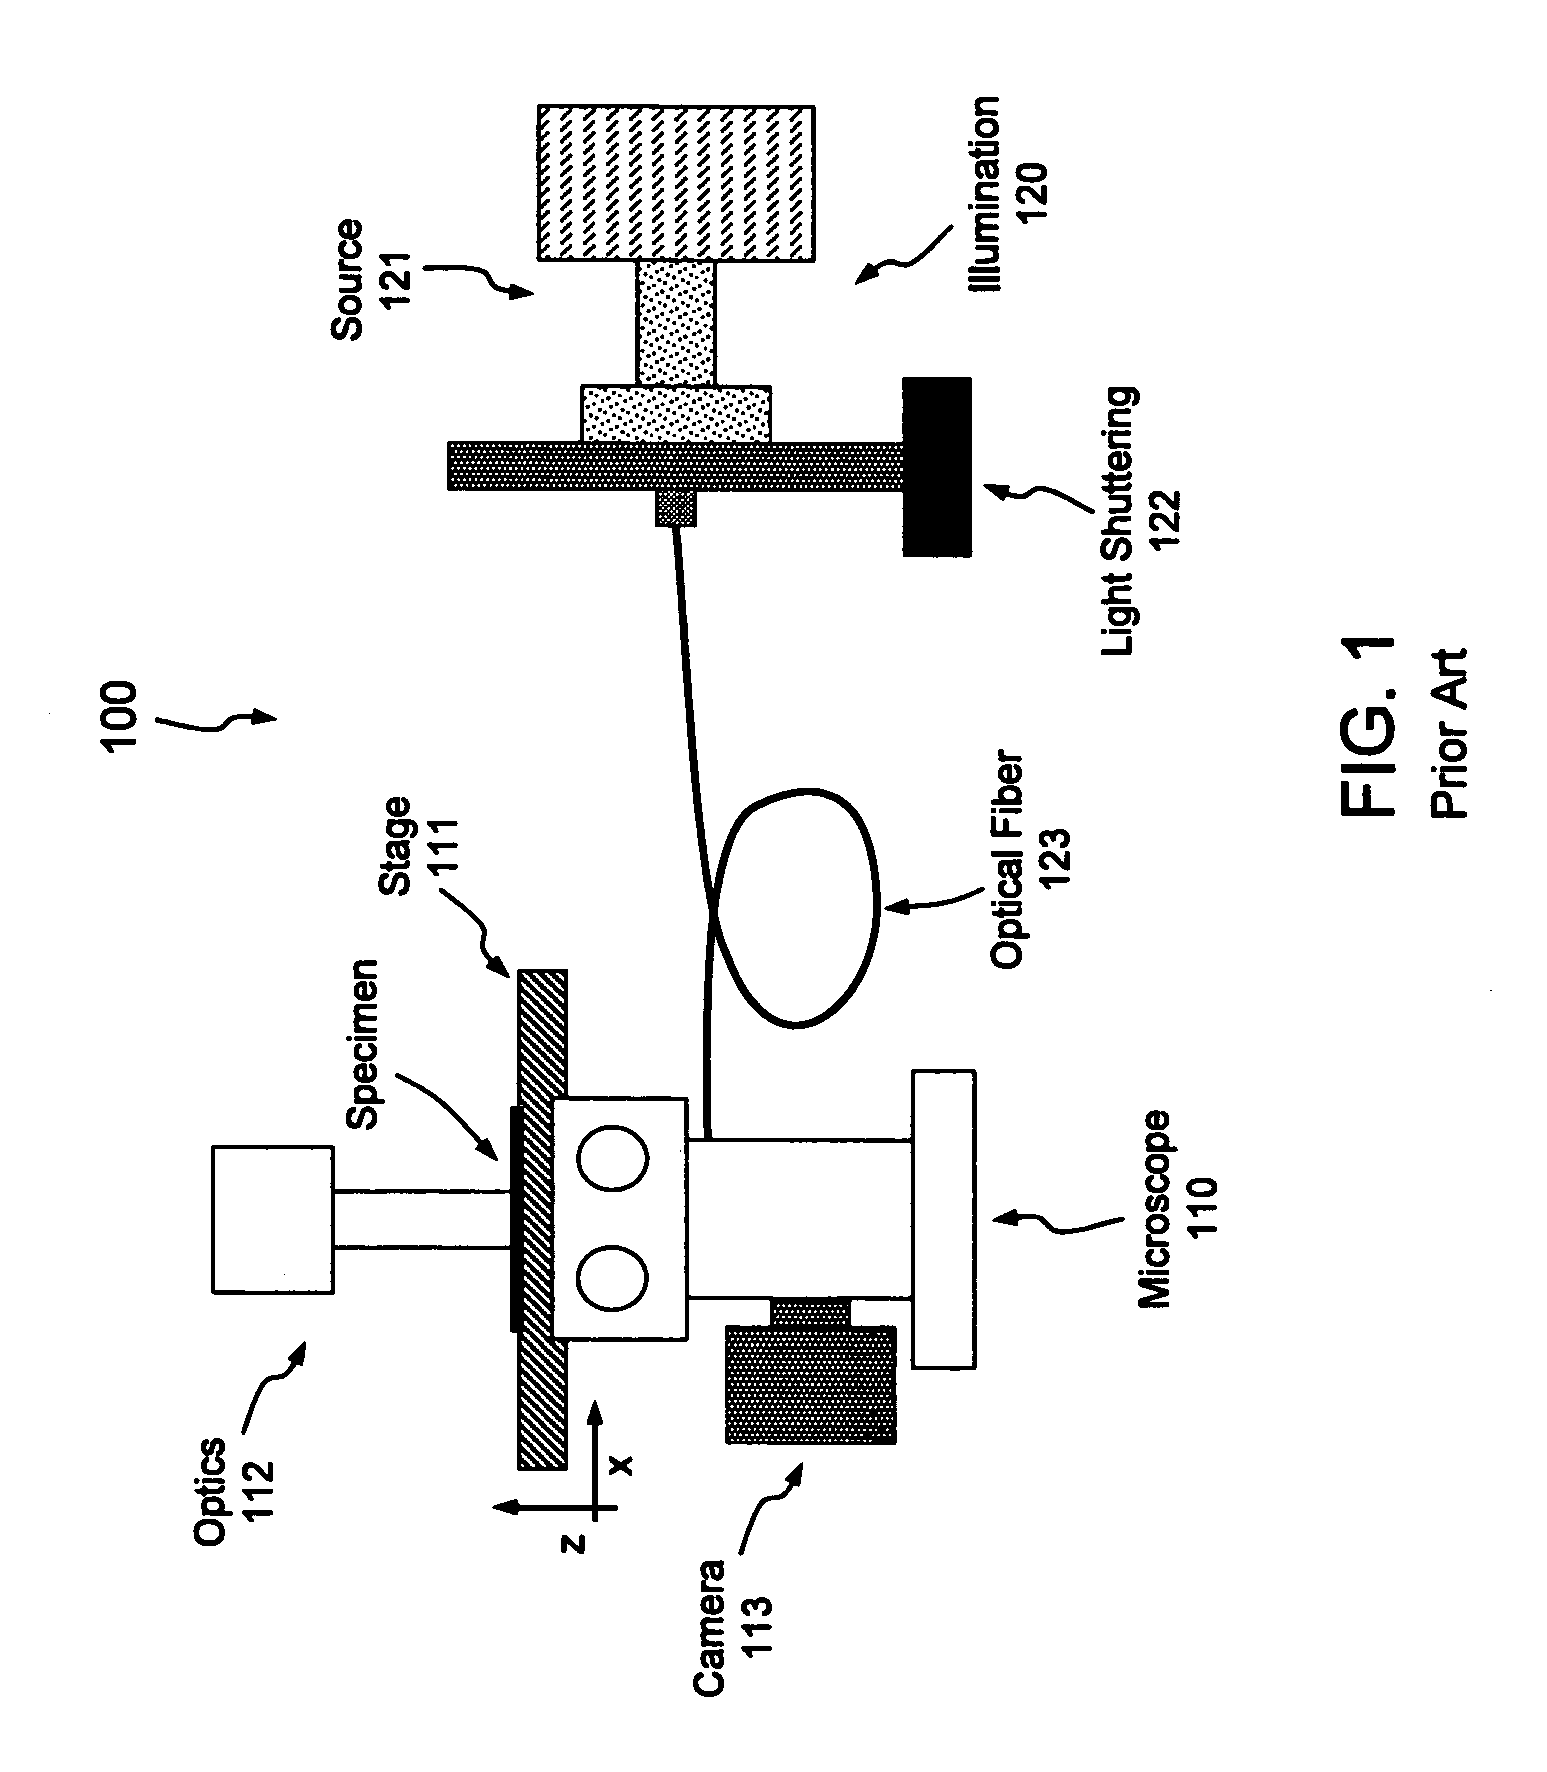 System and method of illuminating living cells for imaging